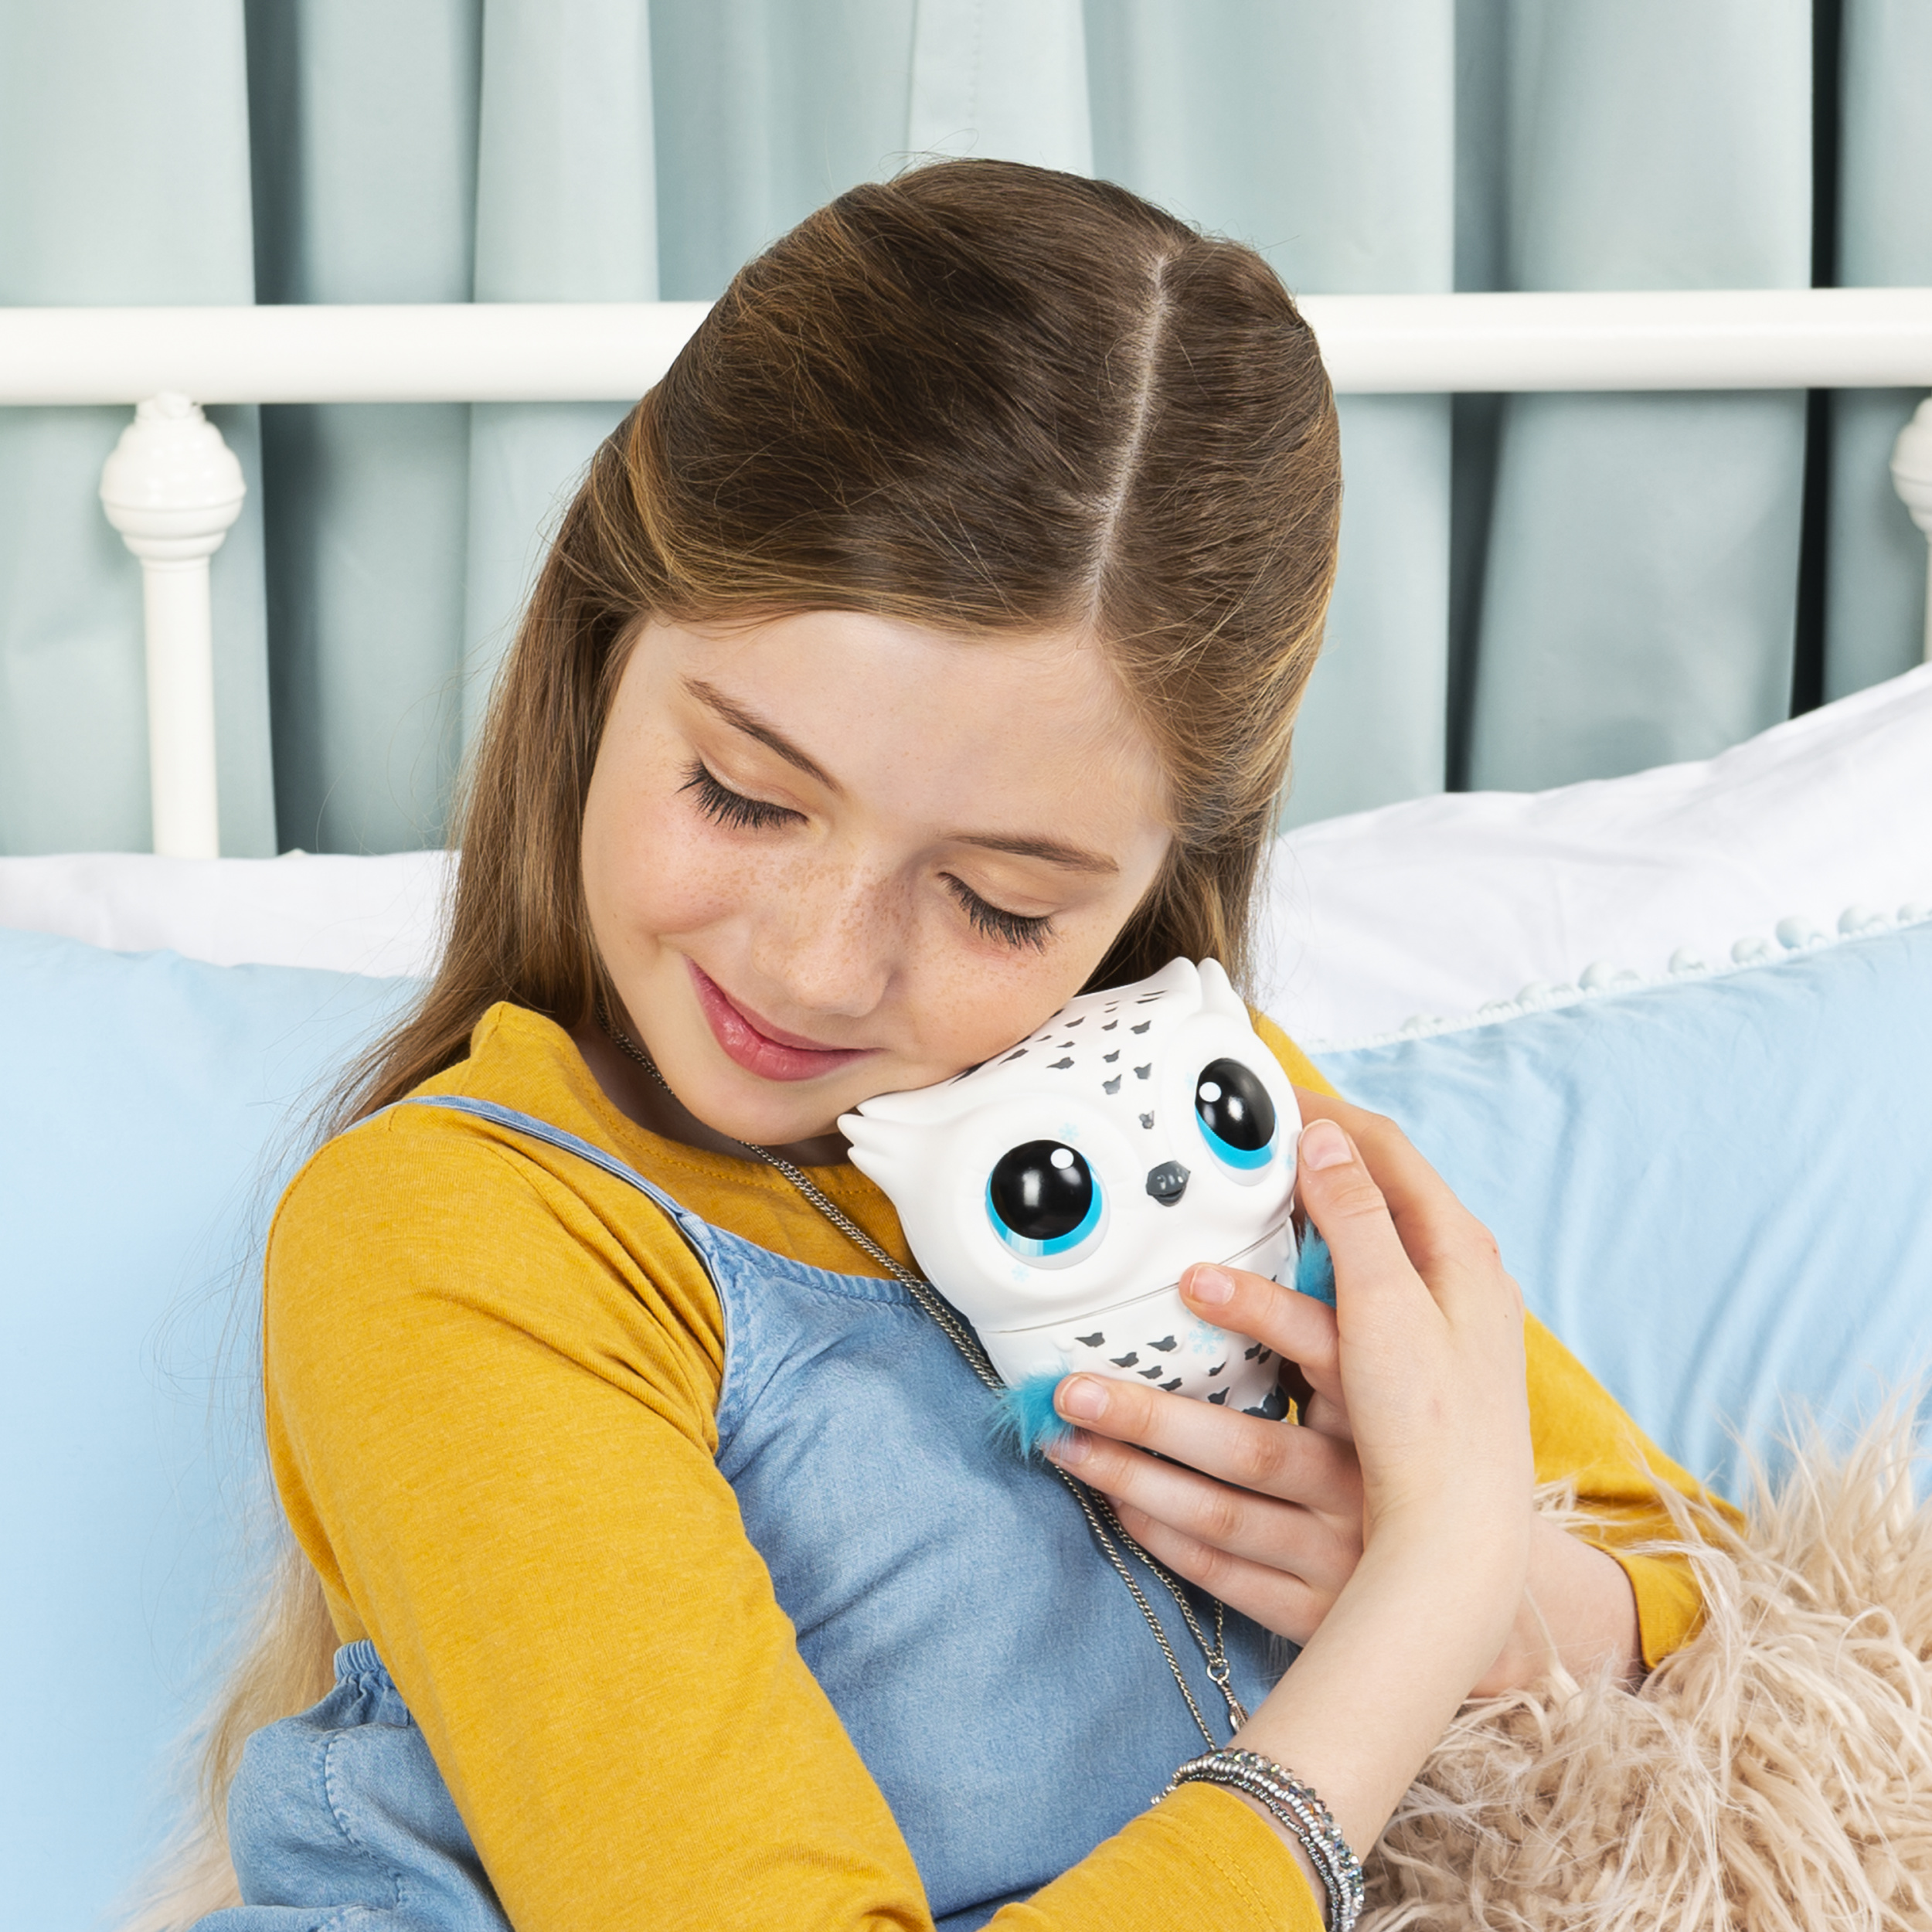 Owleez, Flying Baby Owl Interactive Electronic Pet Toy with Lights and Sounds (White), for Kids Aged 6 and up - image 5 of 8